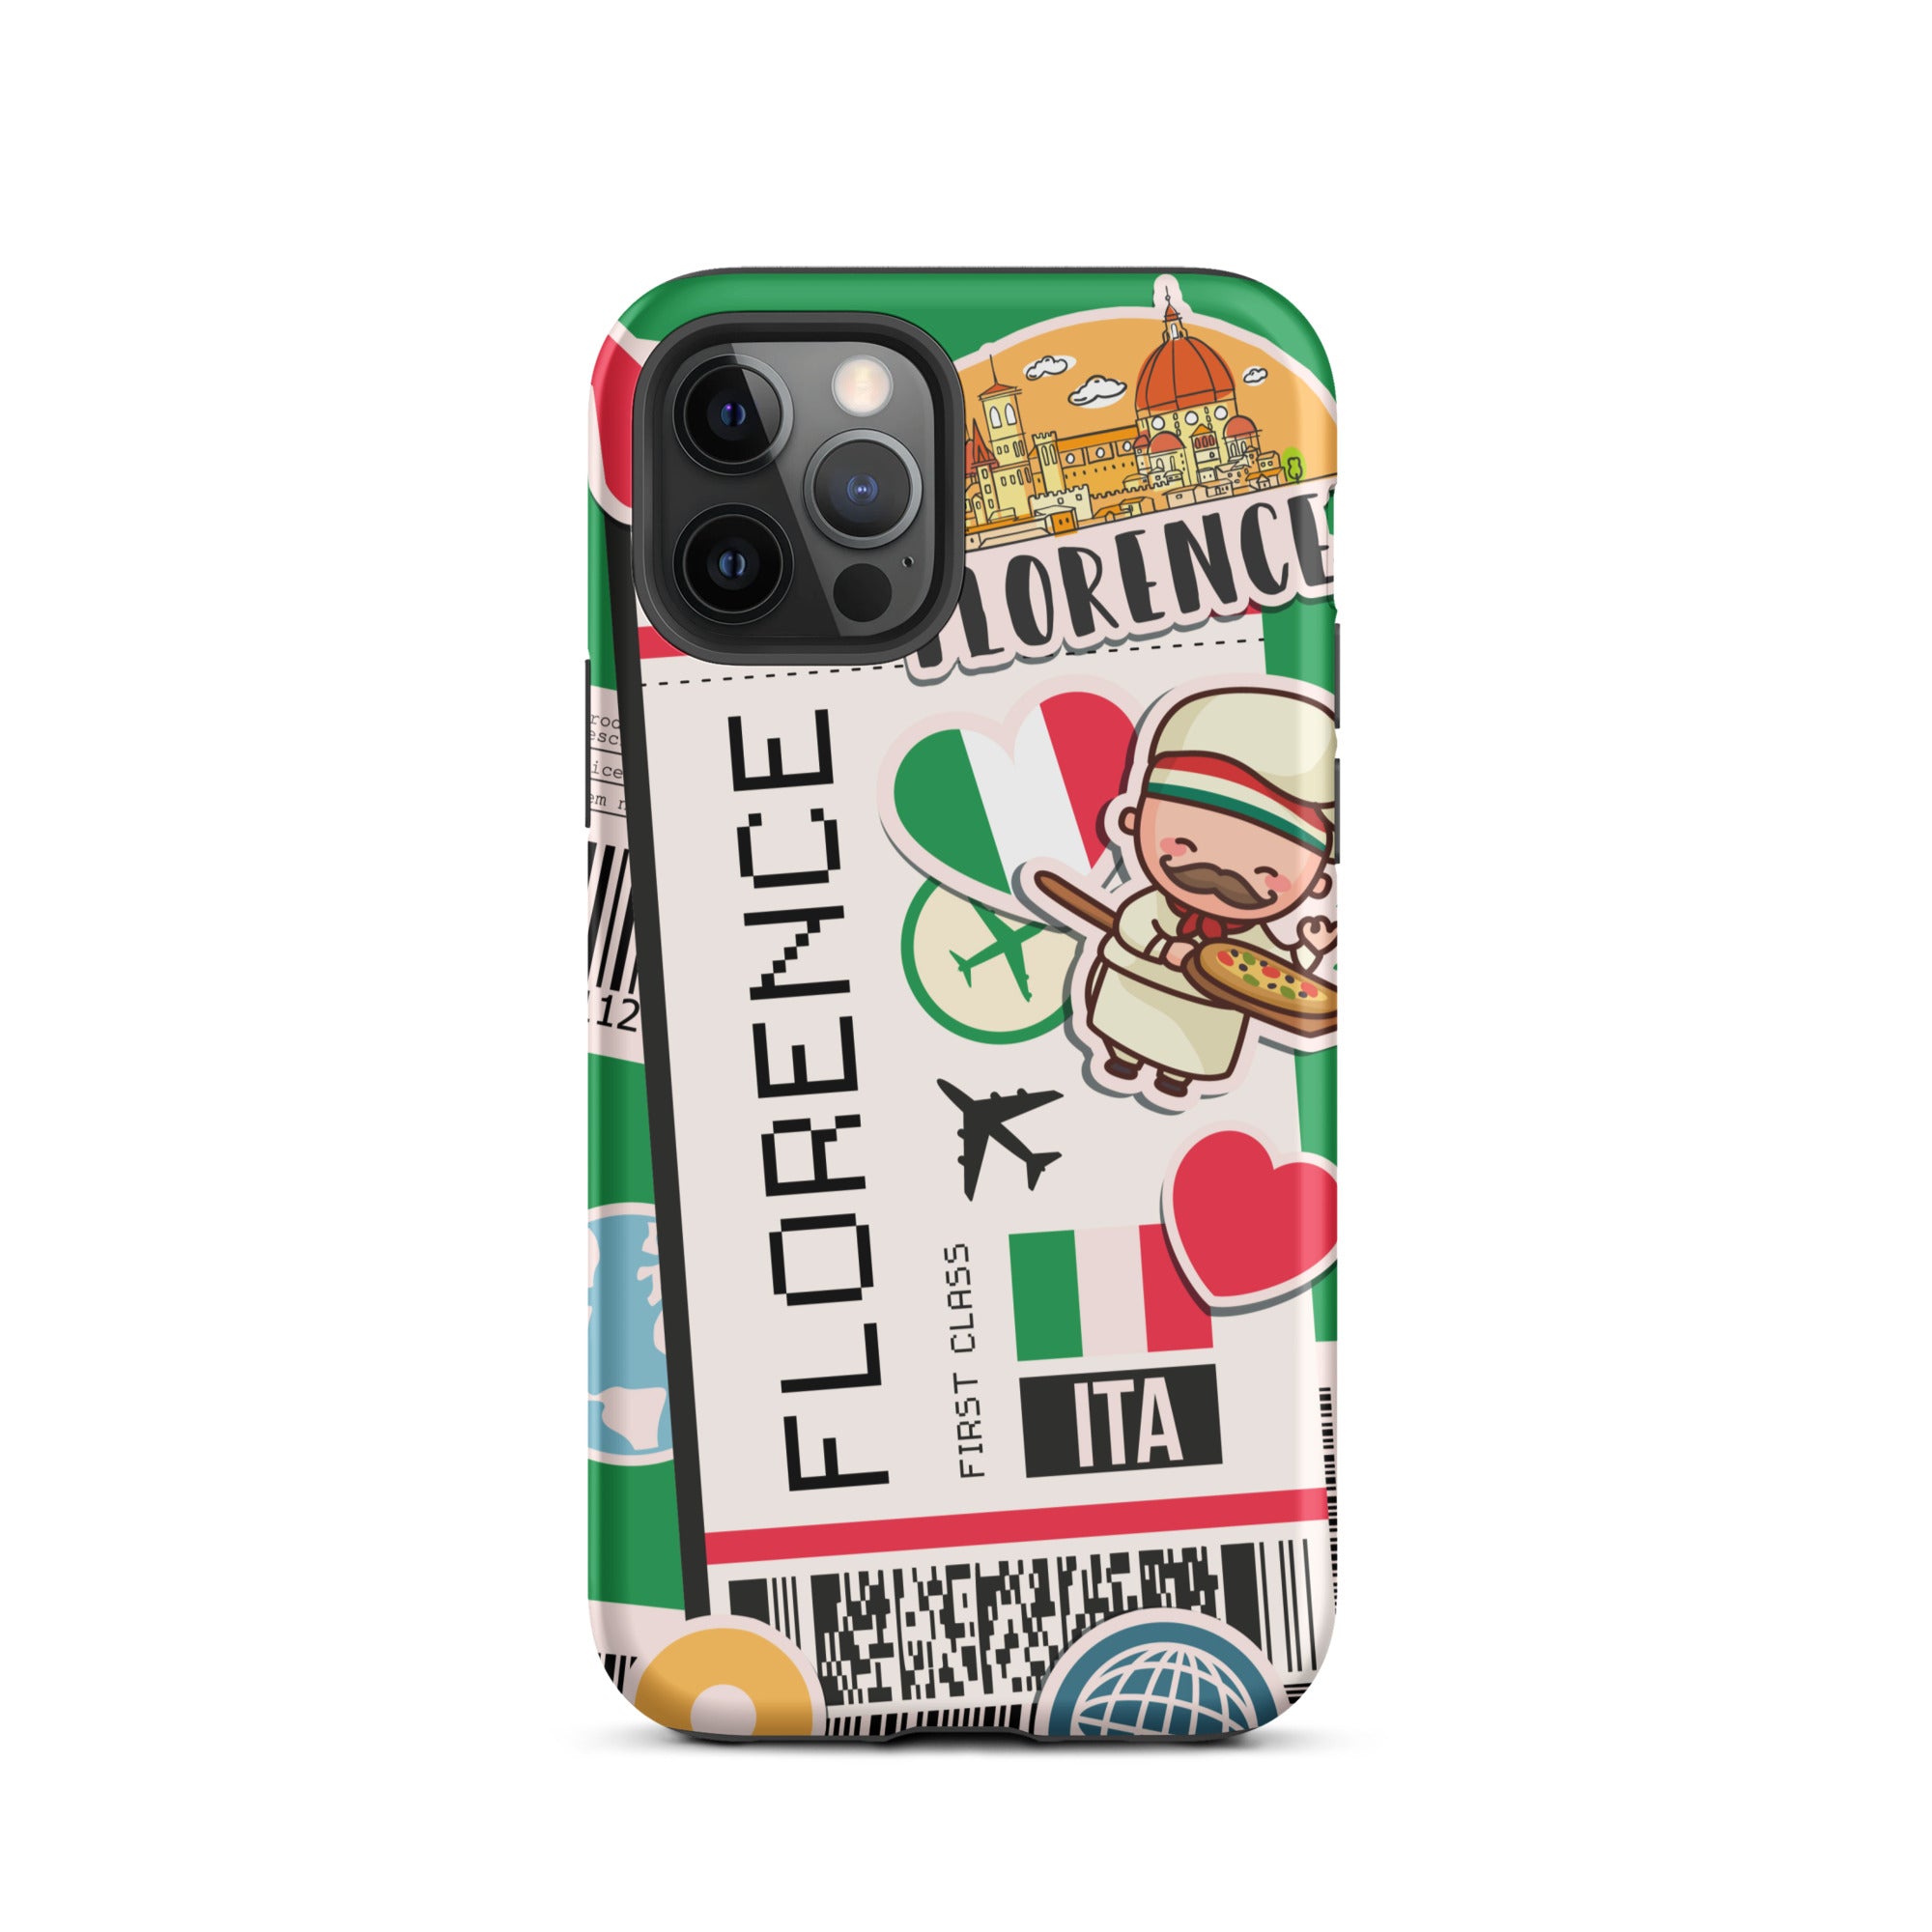 Florence Boarding Pass - iPhone® Tough Case